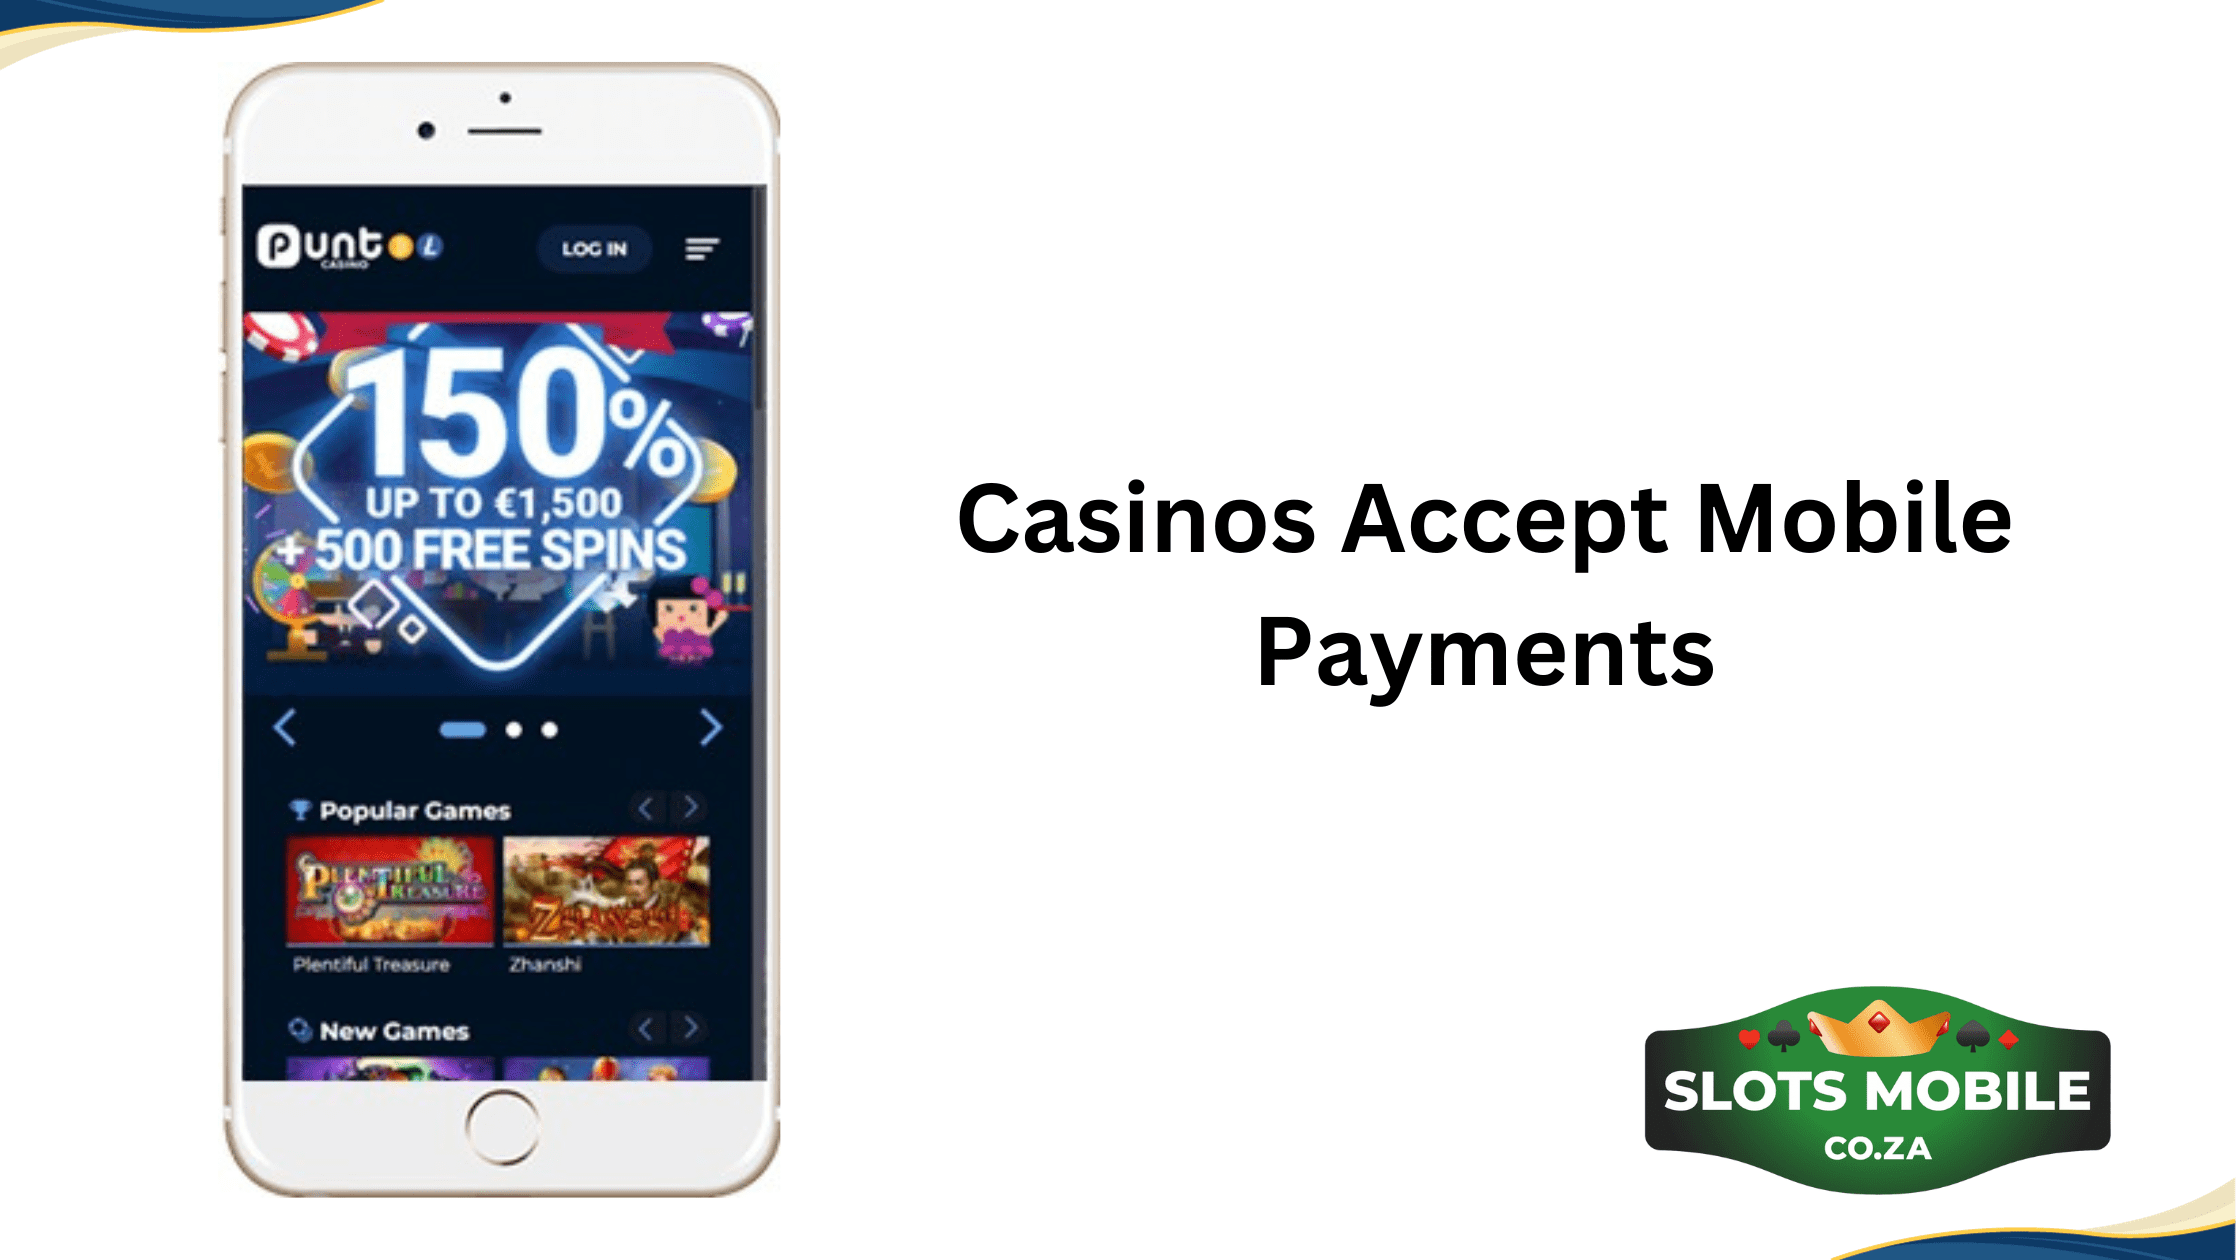 Casinos Accept Mobile Payments